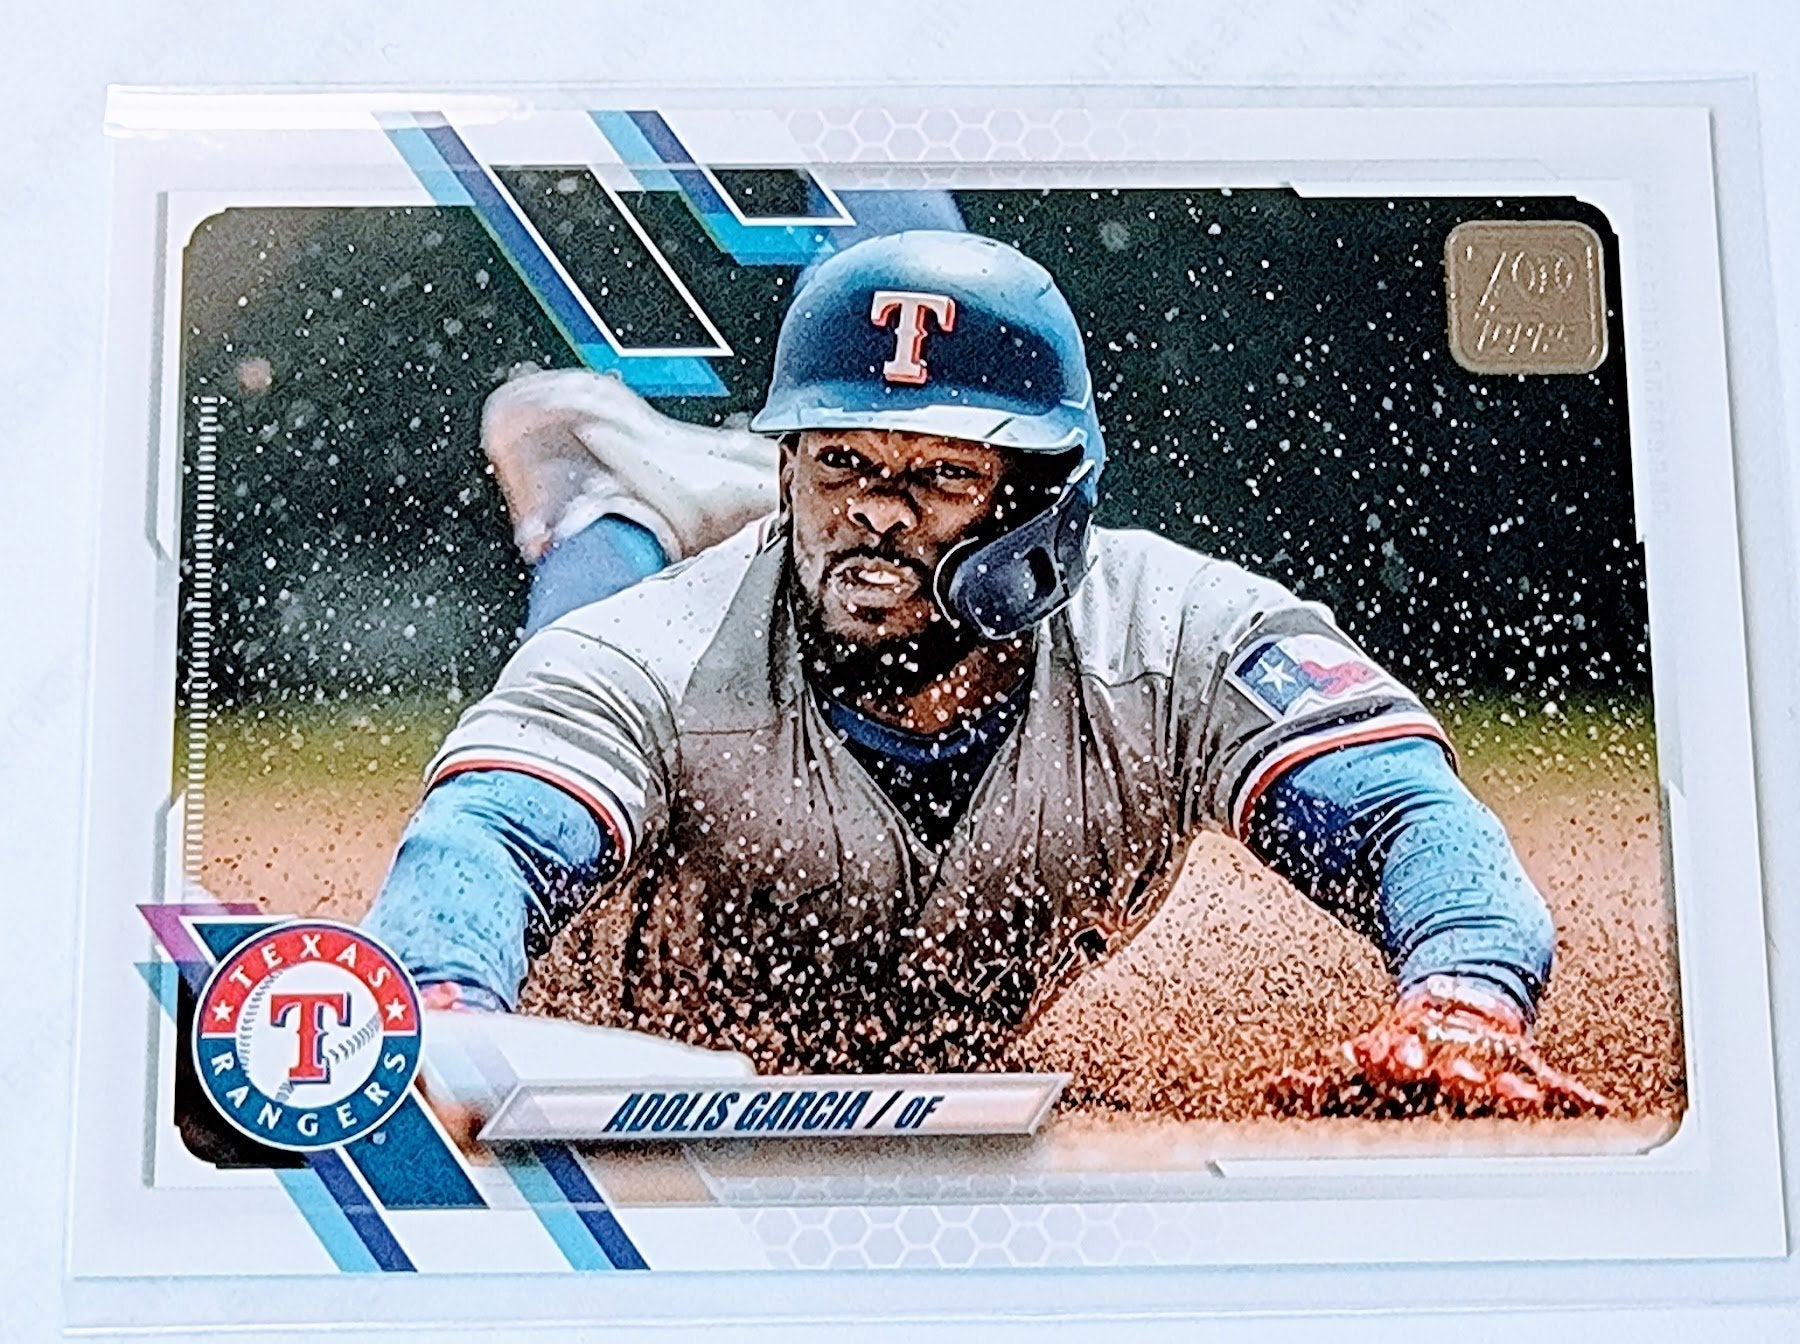 2021 Topps Update Adolis Garcia Baseball Trading Card SMCB1 simple Xclusive Collectibles   